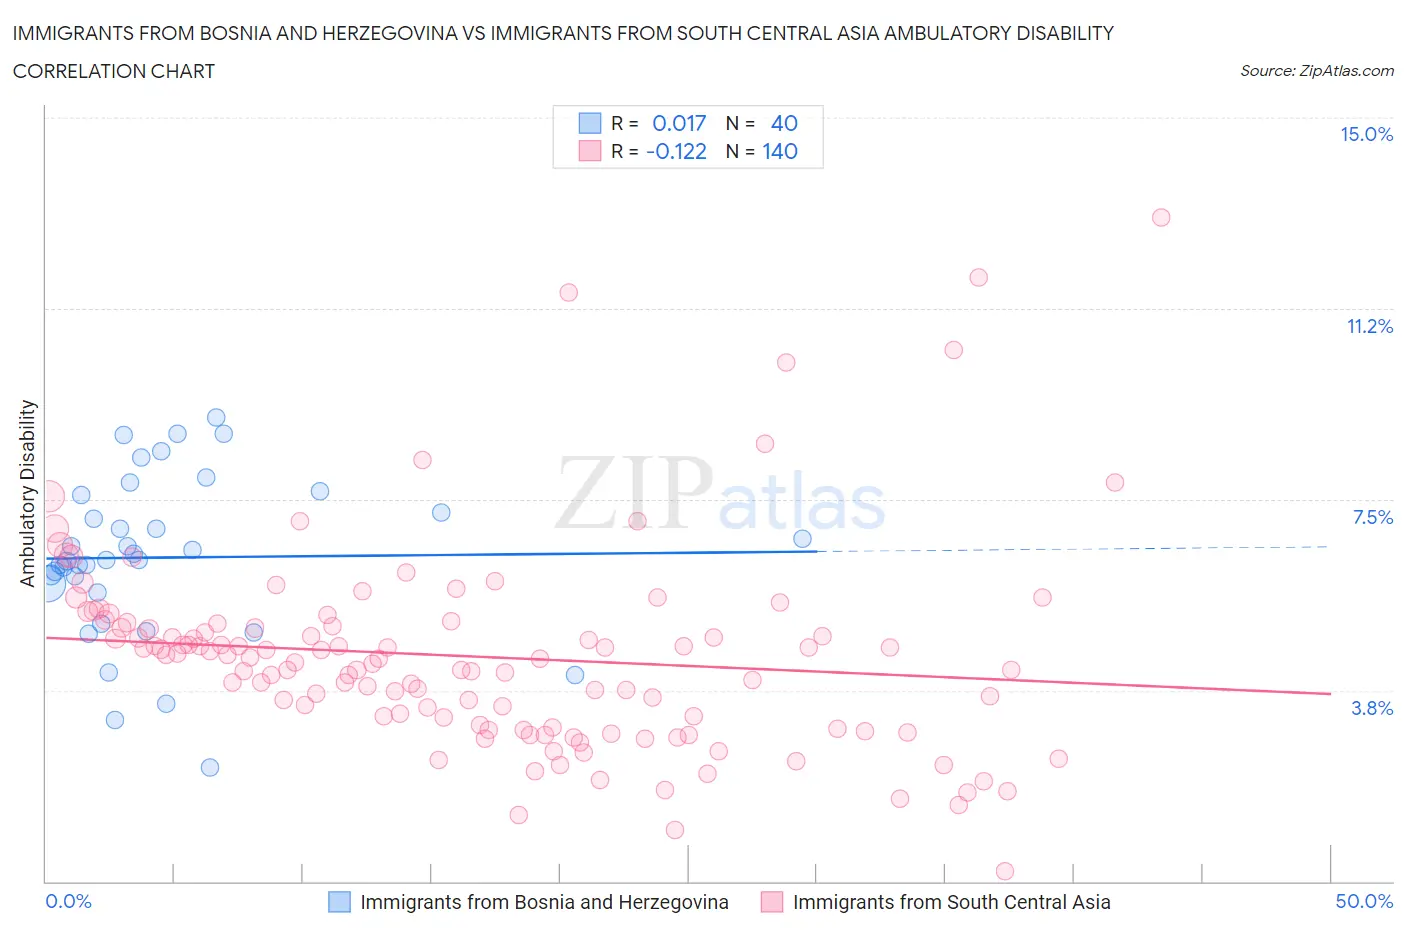 Immigrants from Bosnia and Herzegovina vs Immigrants from South Central Asia Ambulatory Disability